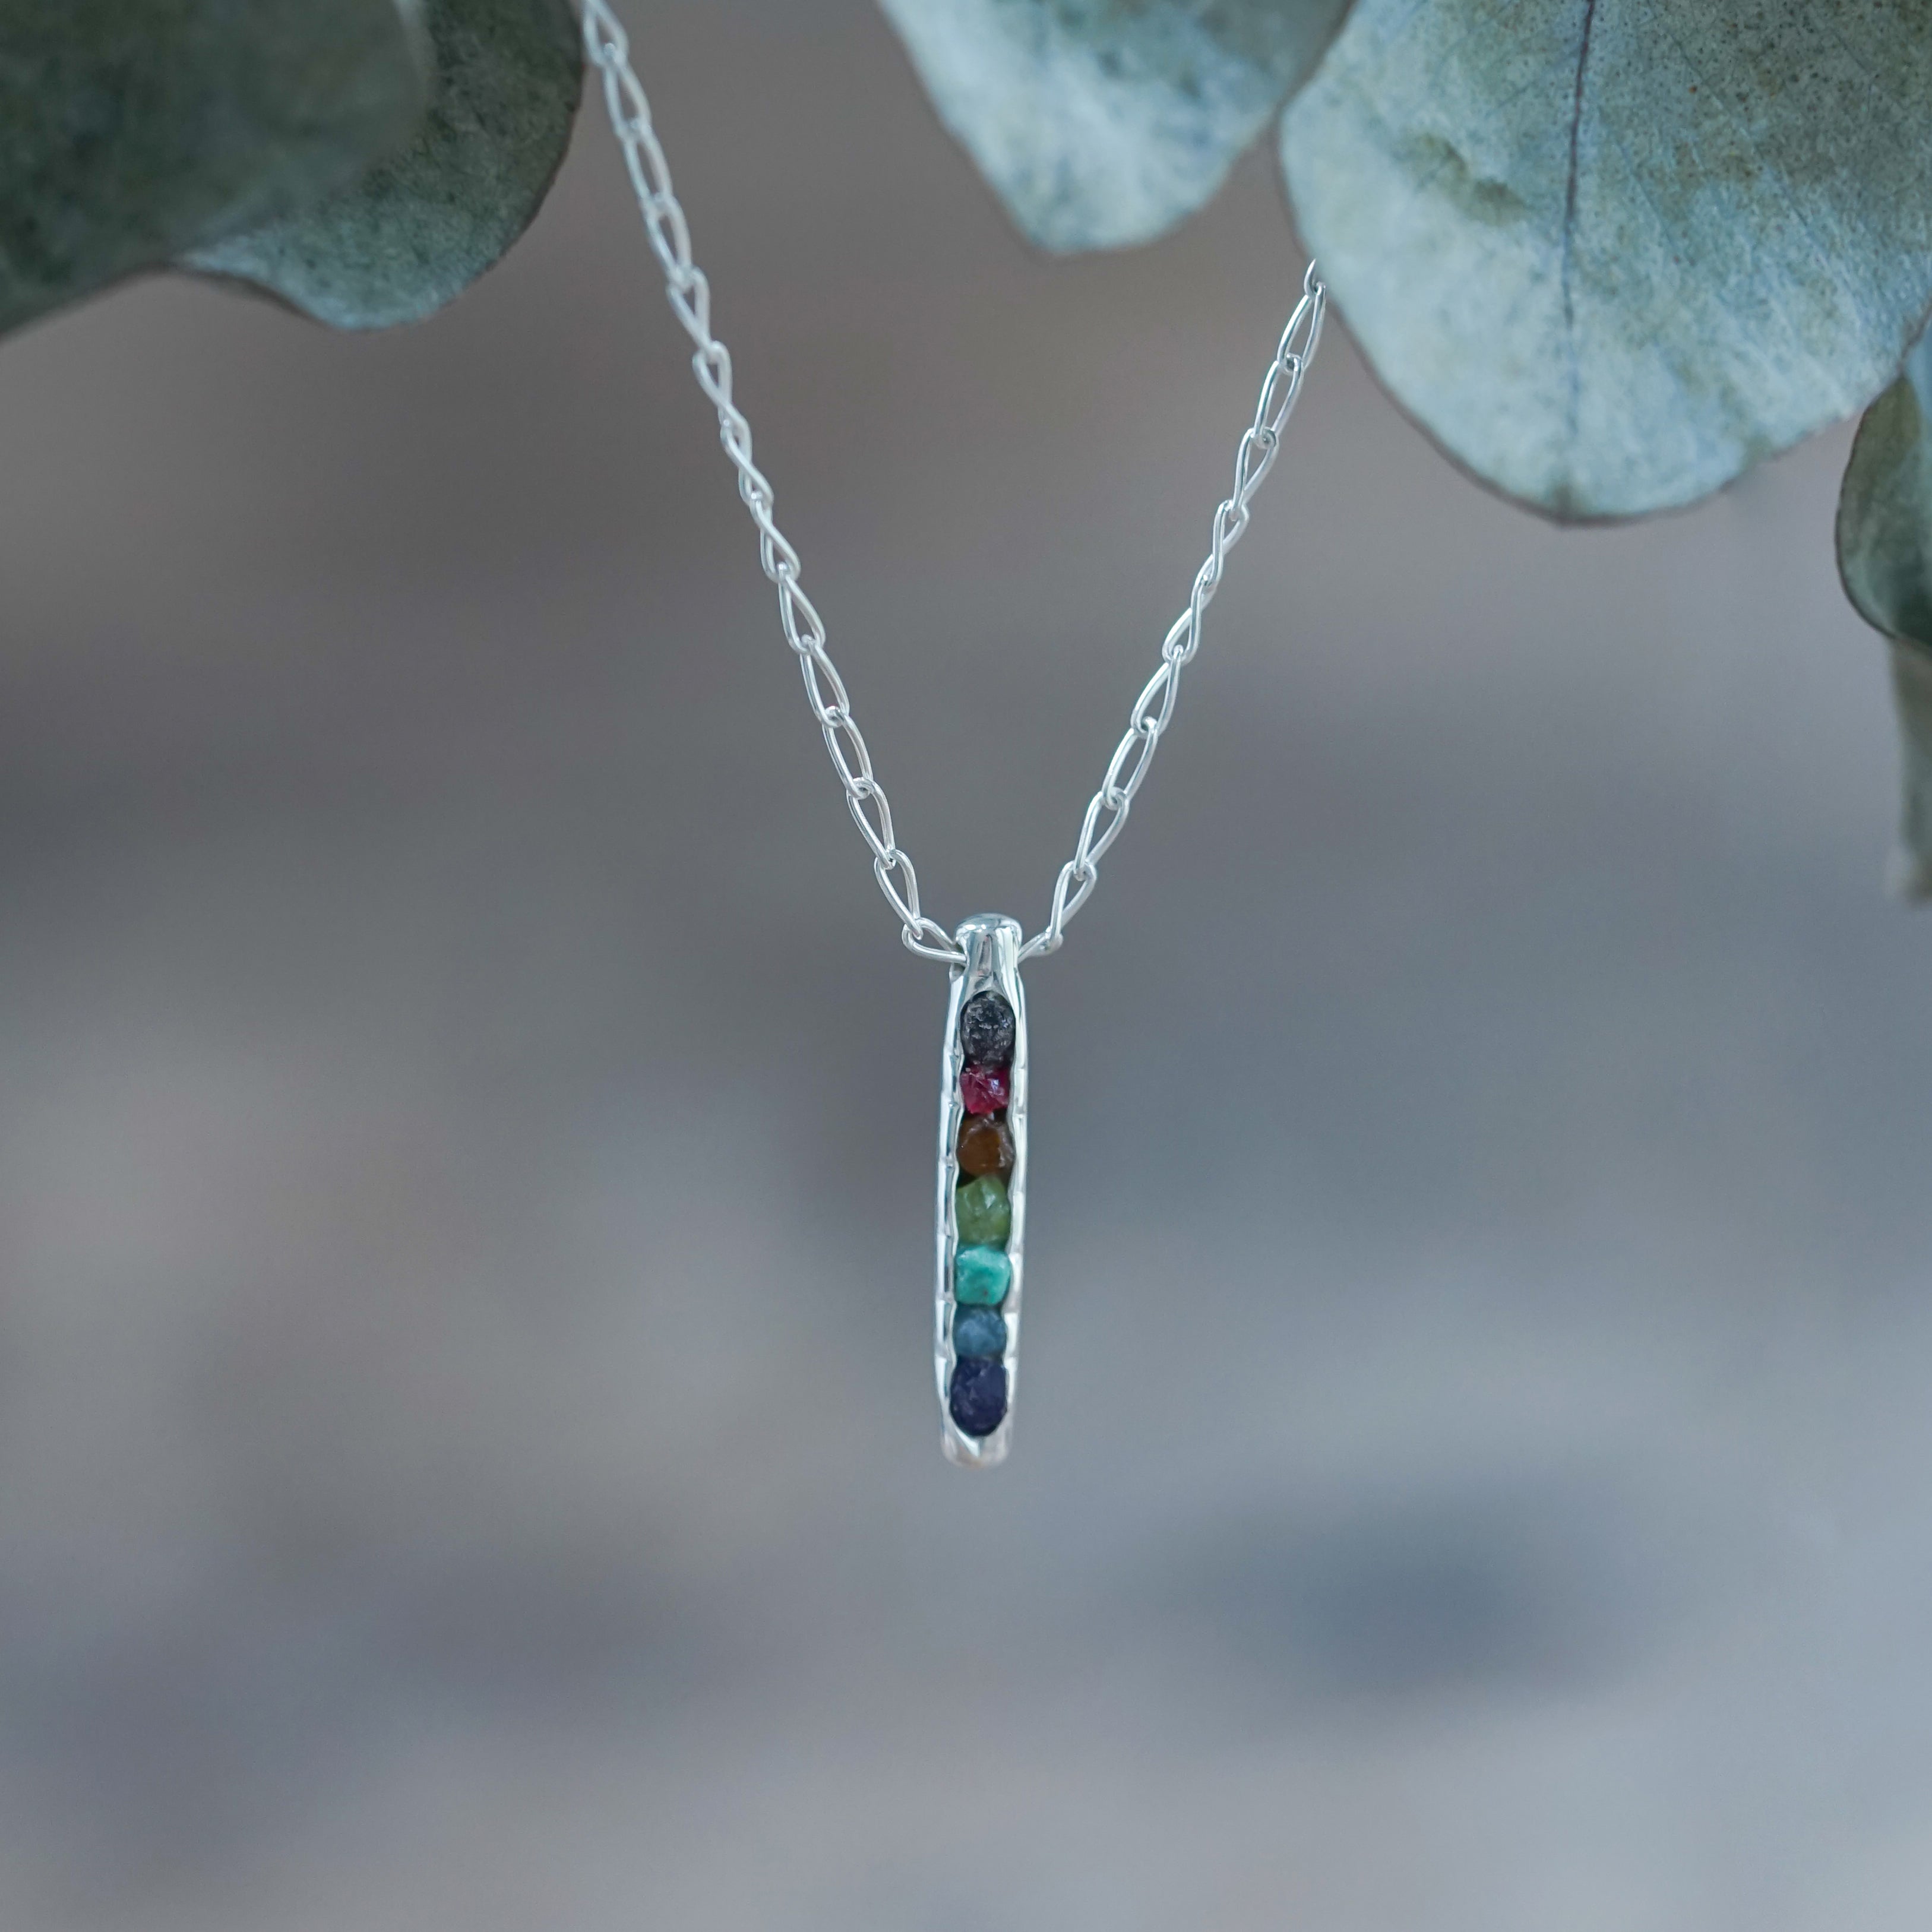 How do you feel about Rainbow Jewelry for Mother's Day gifts? - CG  Sculpture and Jewelry